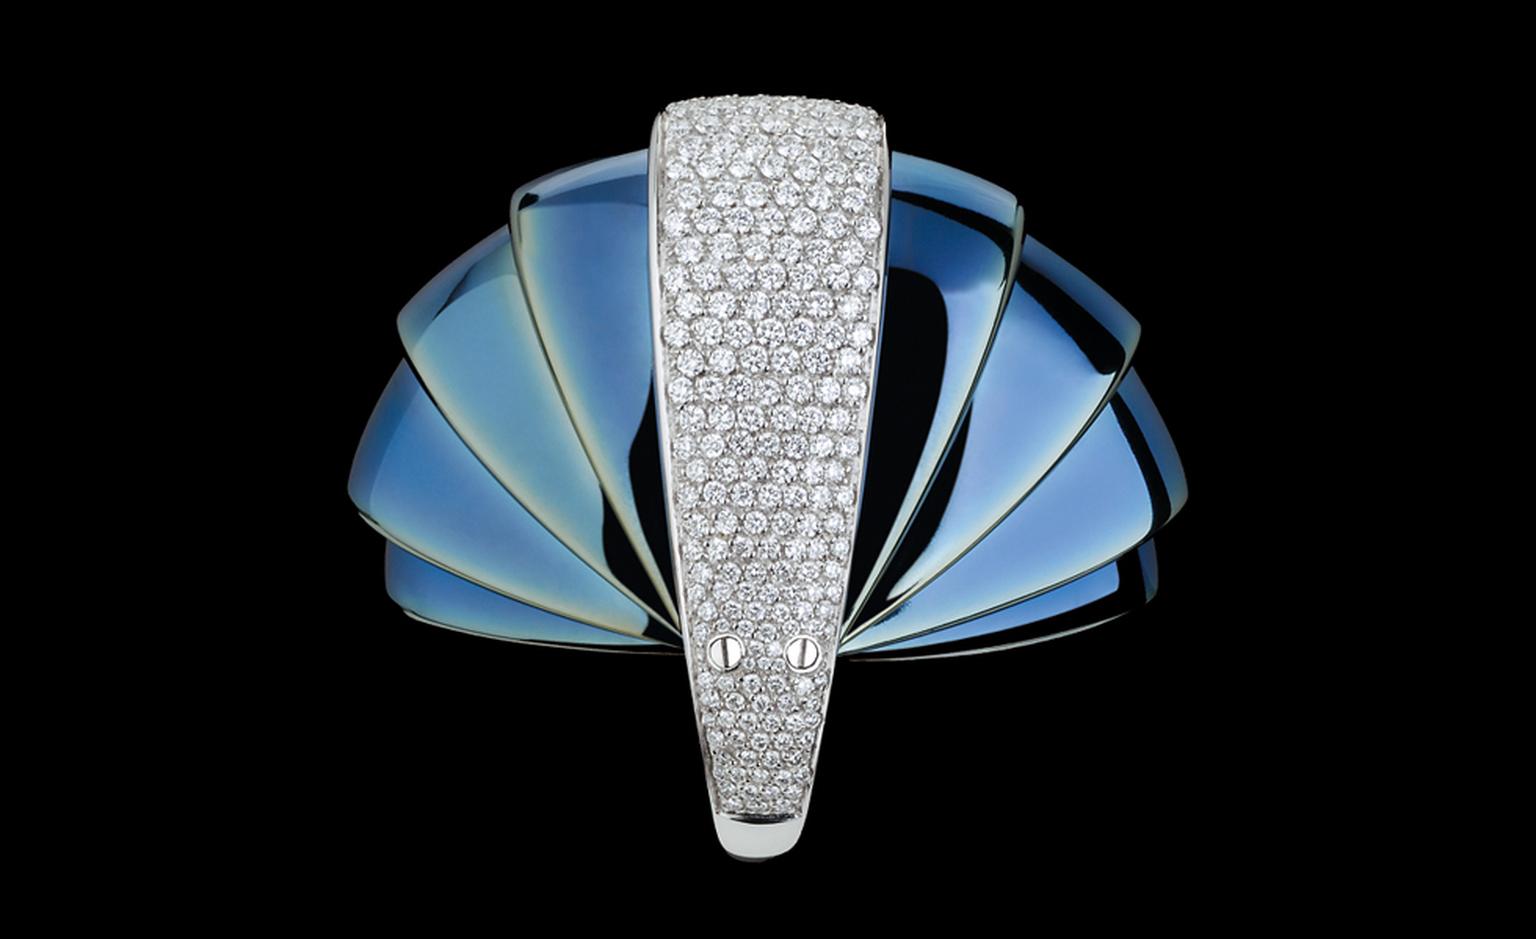 Mattia Cielo Armadillo in blued gold and white gold set with diamonds in motion